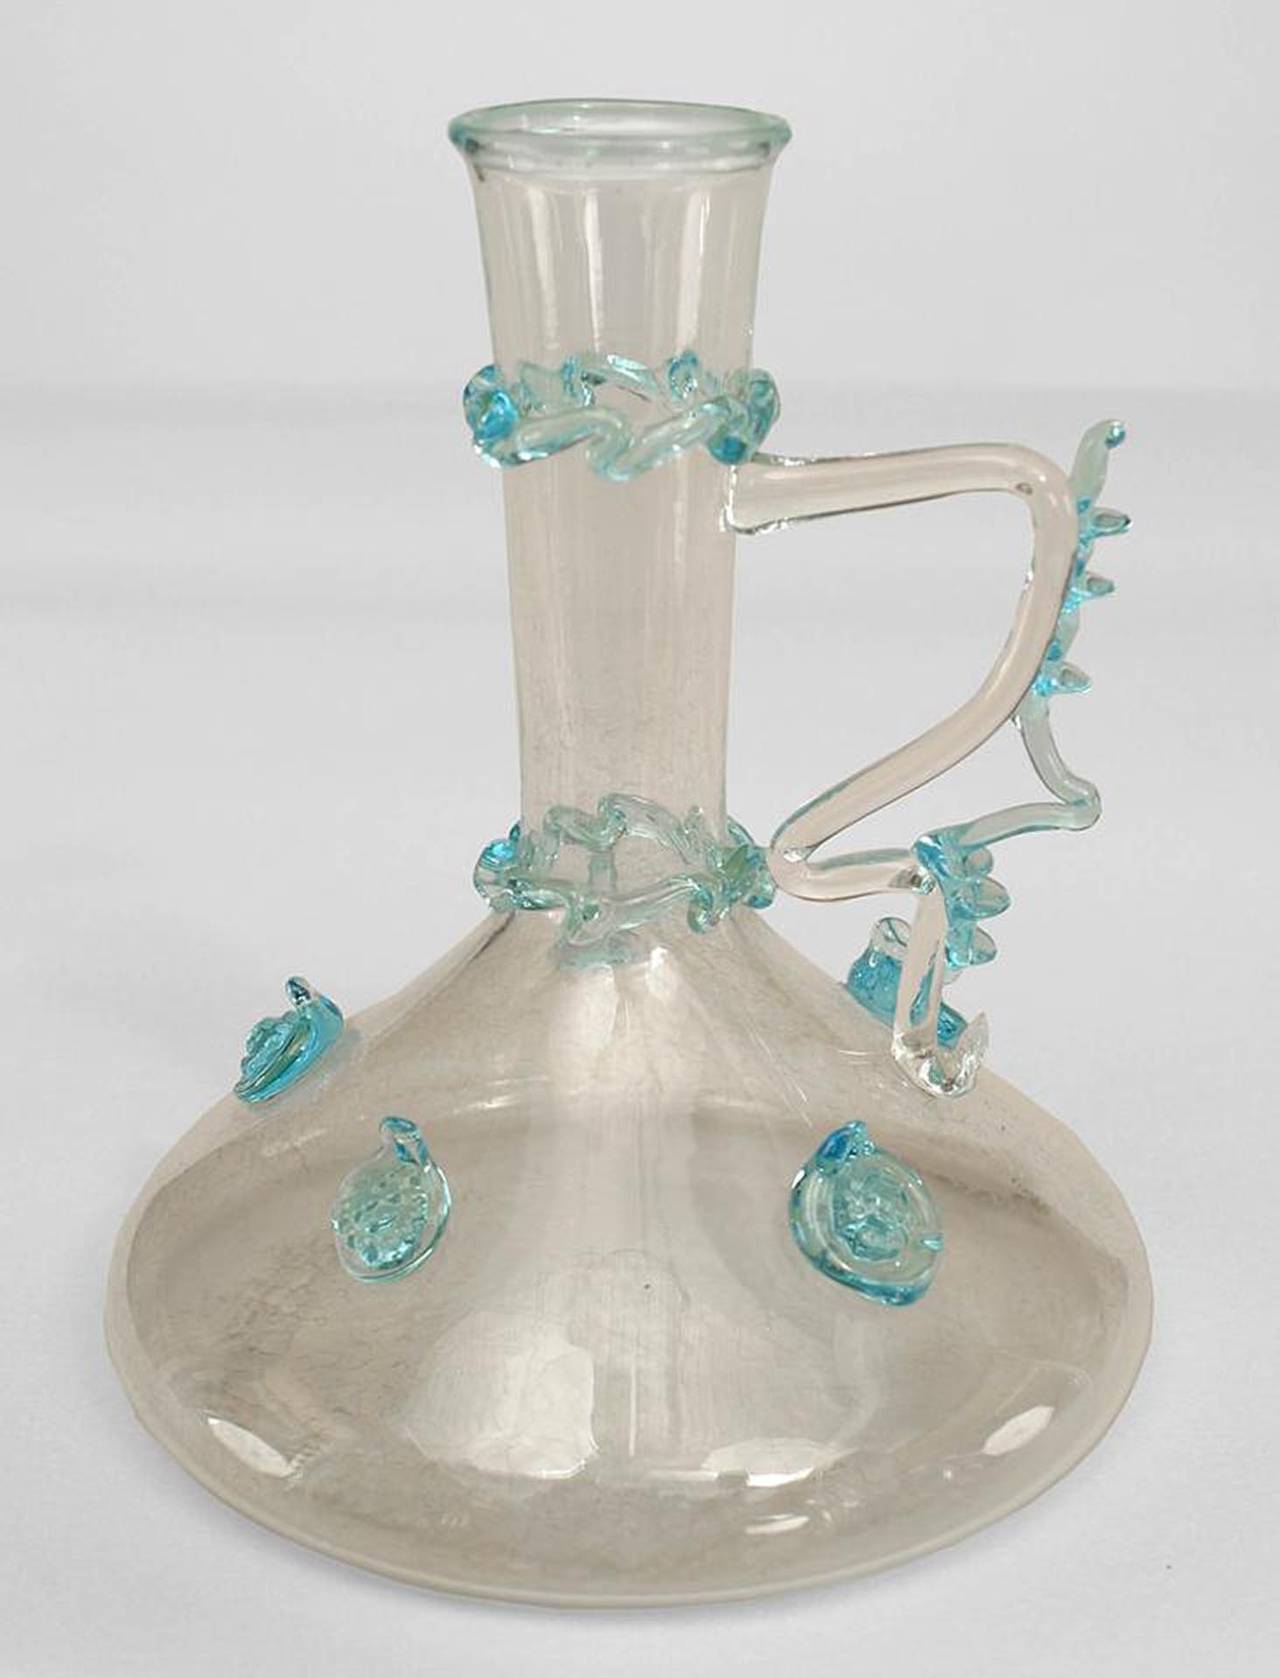 2 Italian Venetian Murano (circa 1920) bud vase with stylized handle and applied colored glass trim (PRICED EACH)
